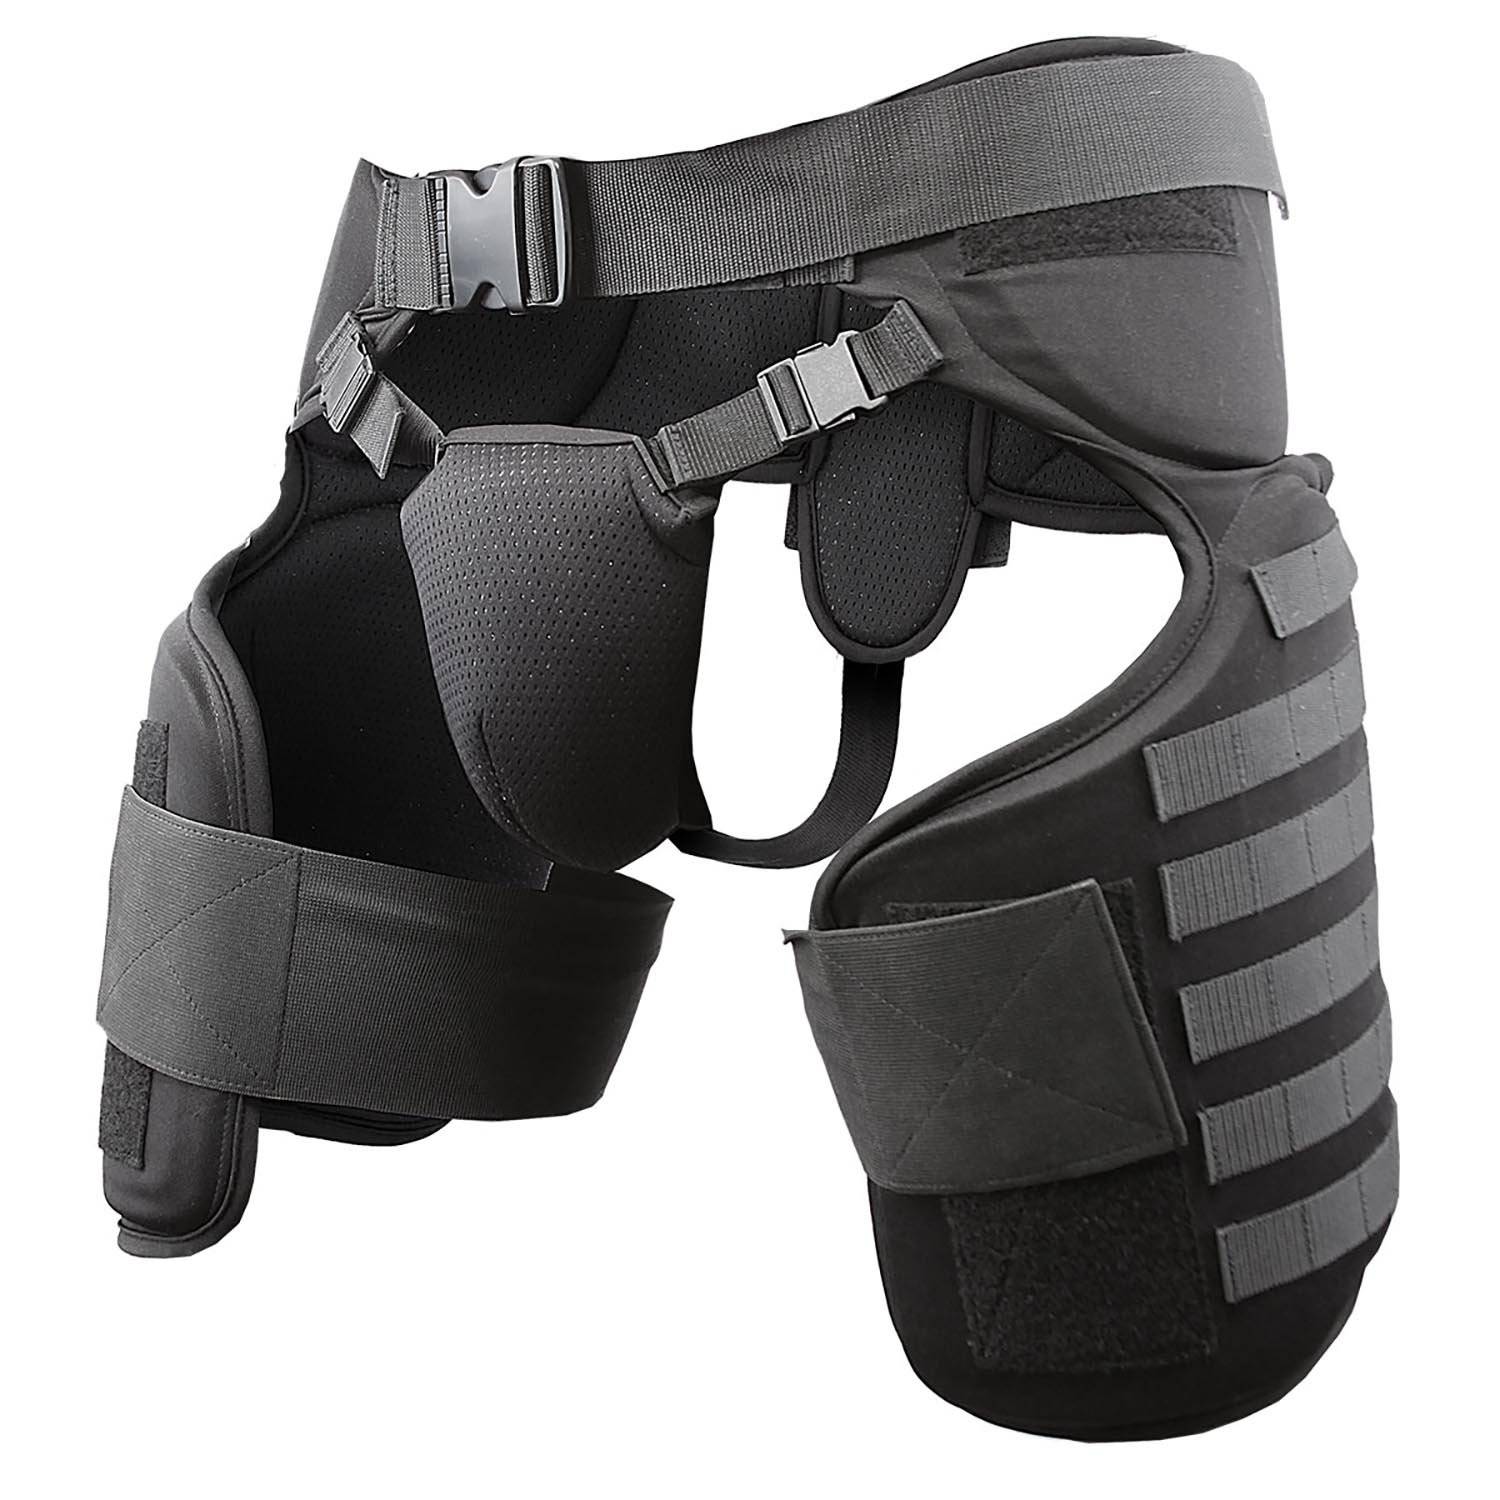 Damascus Imperial Thigh/Groin Protector with Molle System